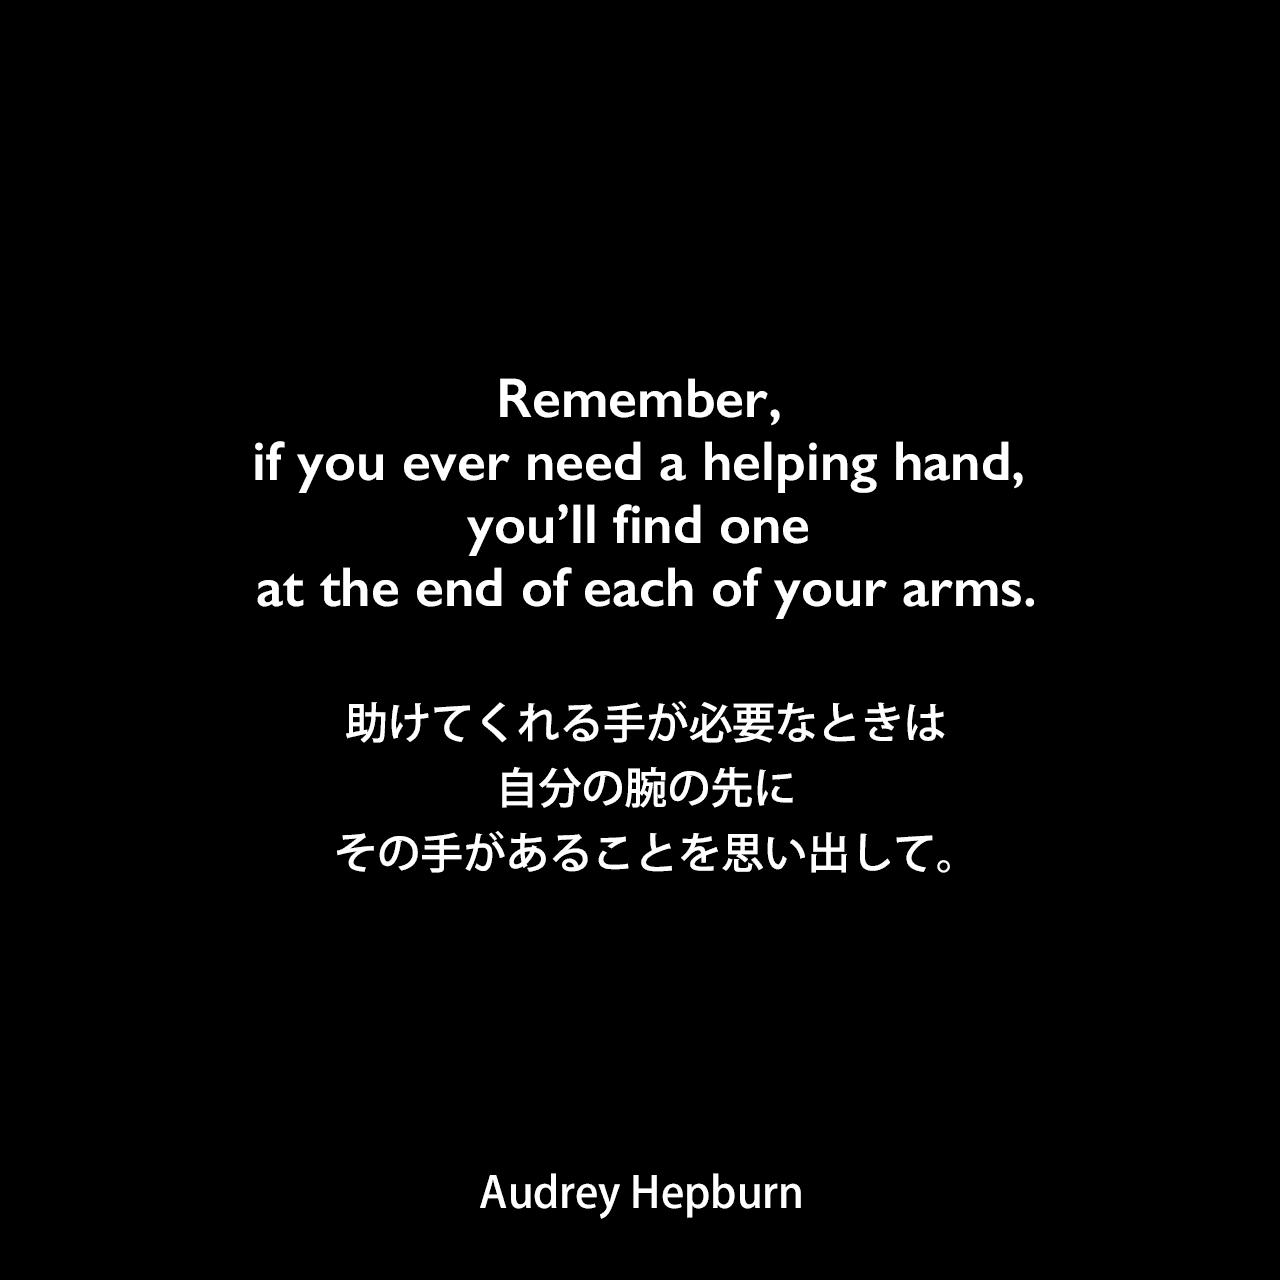 Remember, if you ever need a helping hand, you’ll find one at the end of each of your arms.助けてくれる手が必要なときは、自分の腕の先にその手があることを思い出して。Audrey Hepburn